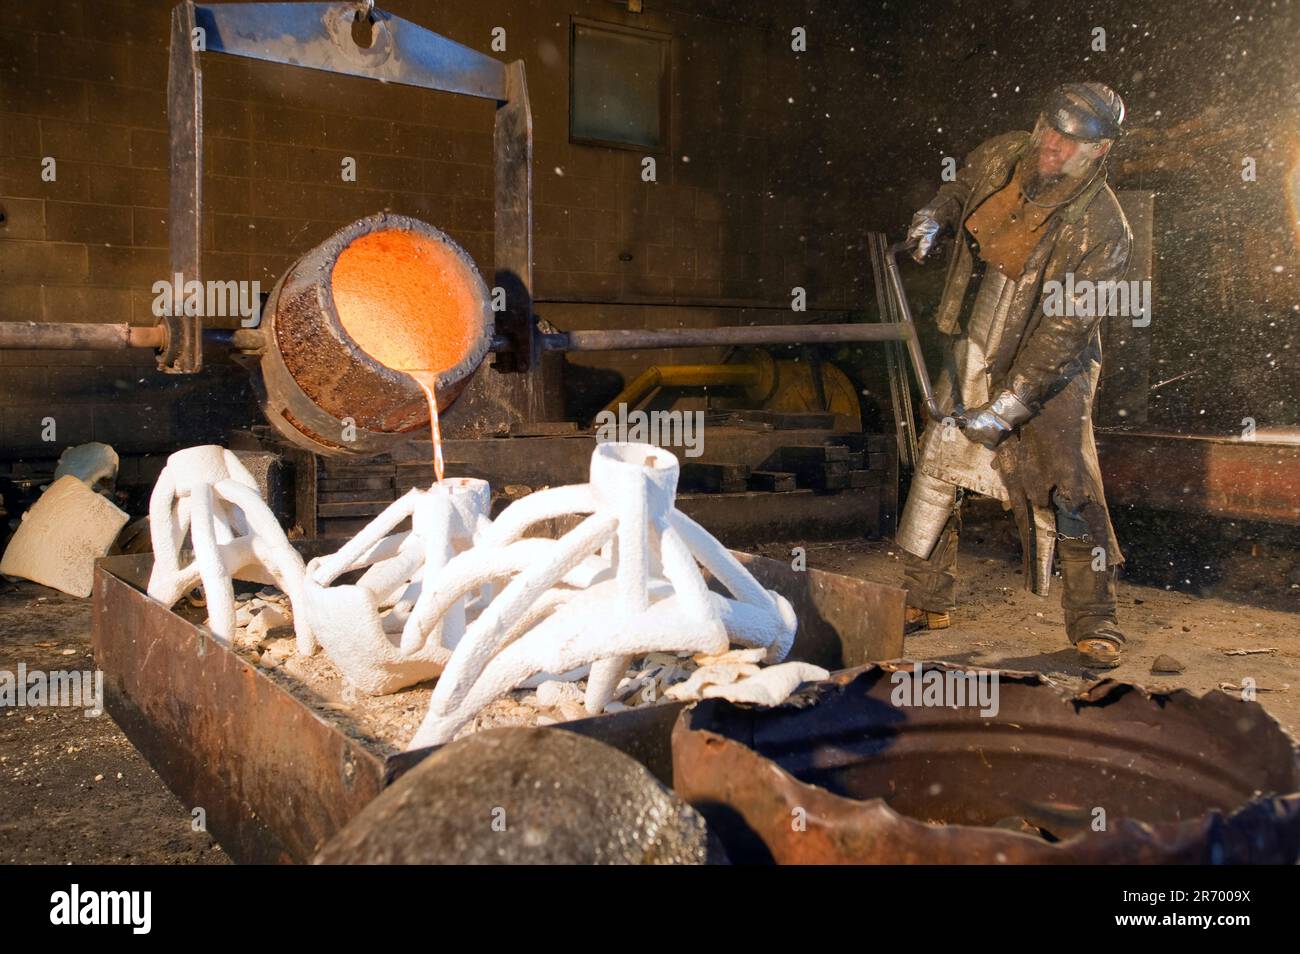 A man pouring orange molten bronze into white moldings in a foundry with the help of a support crane. Stock Photo